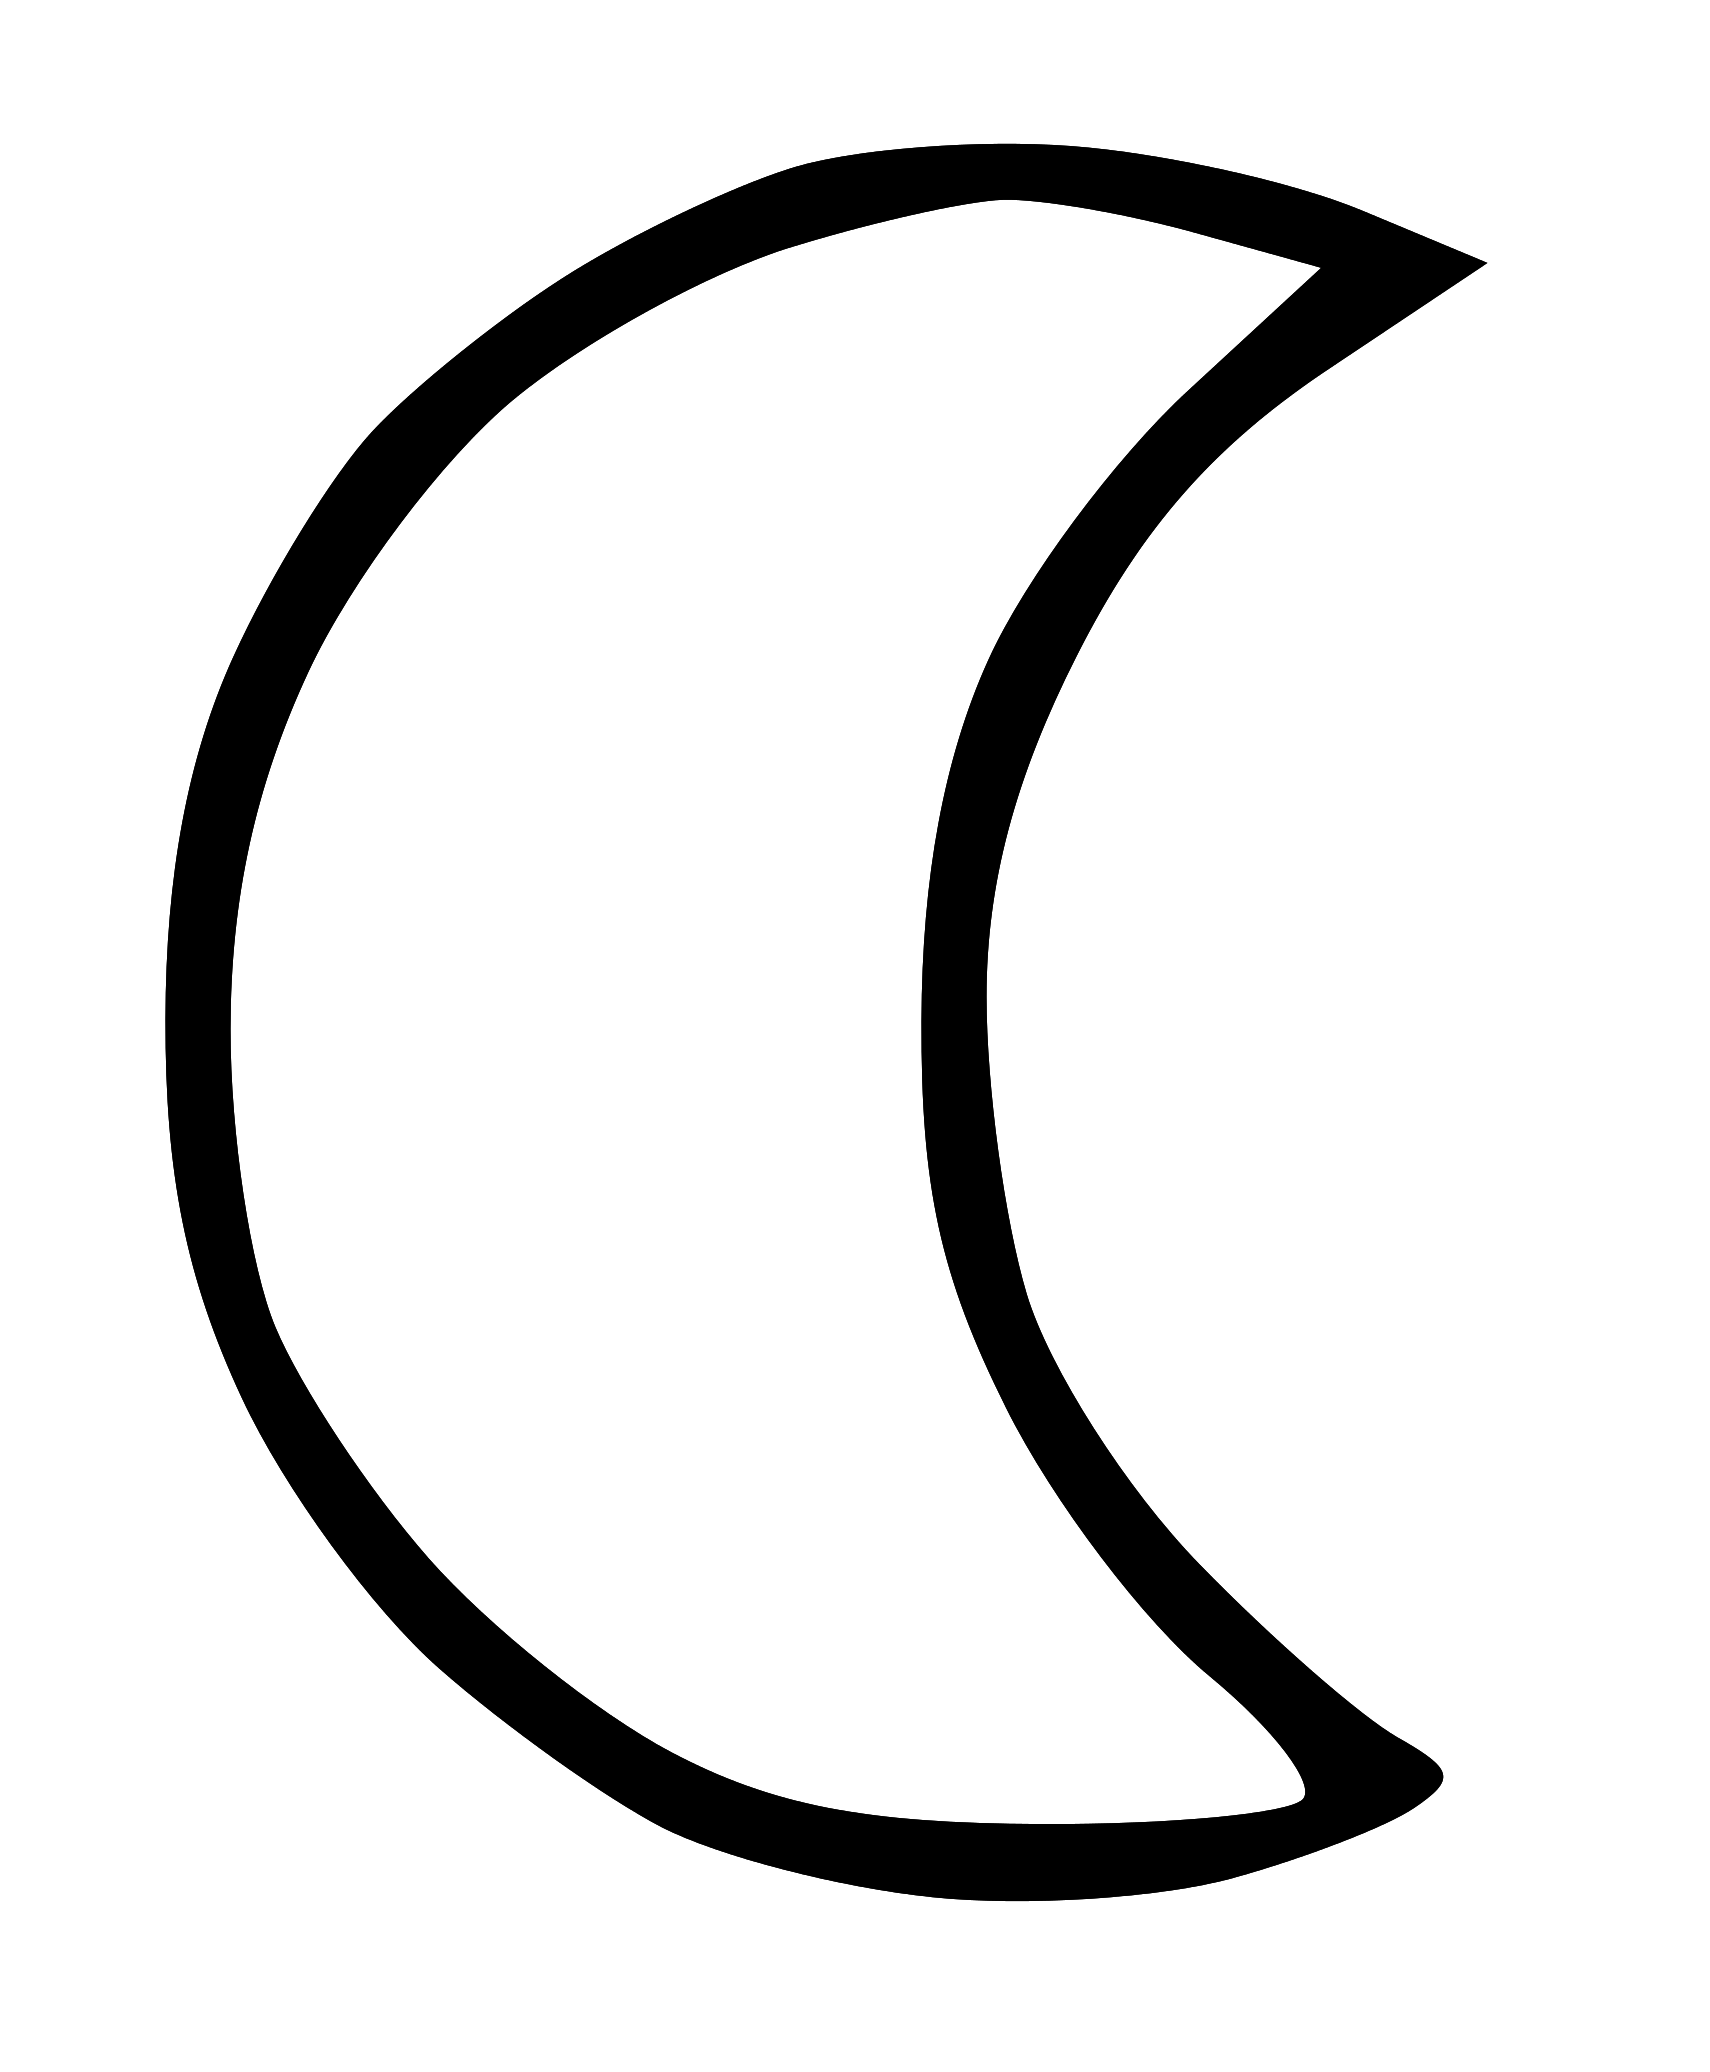 Moon outline clipart black and white